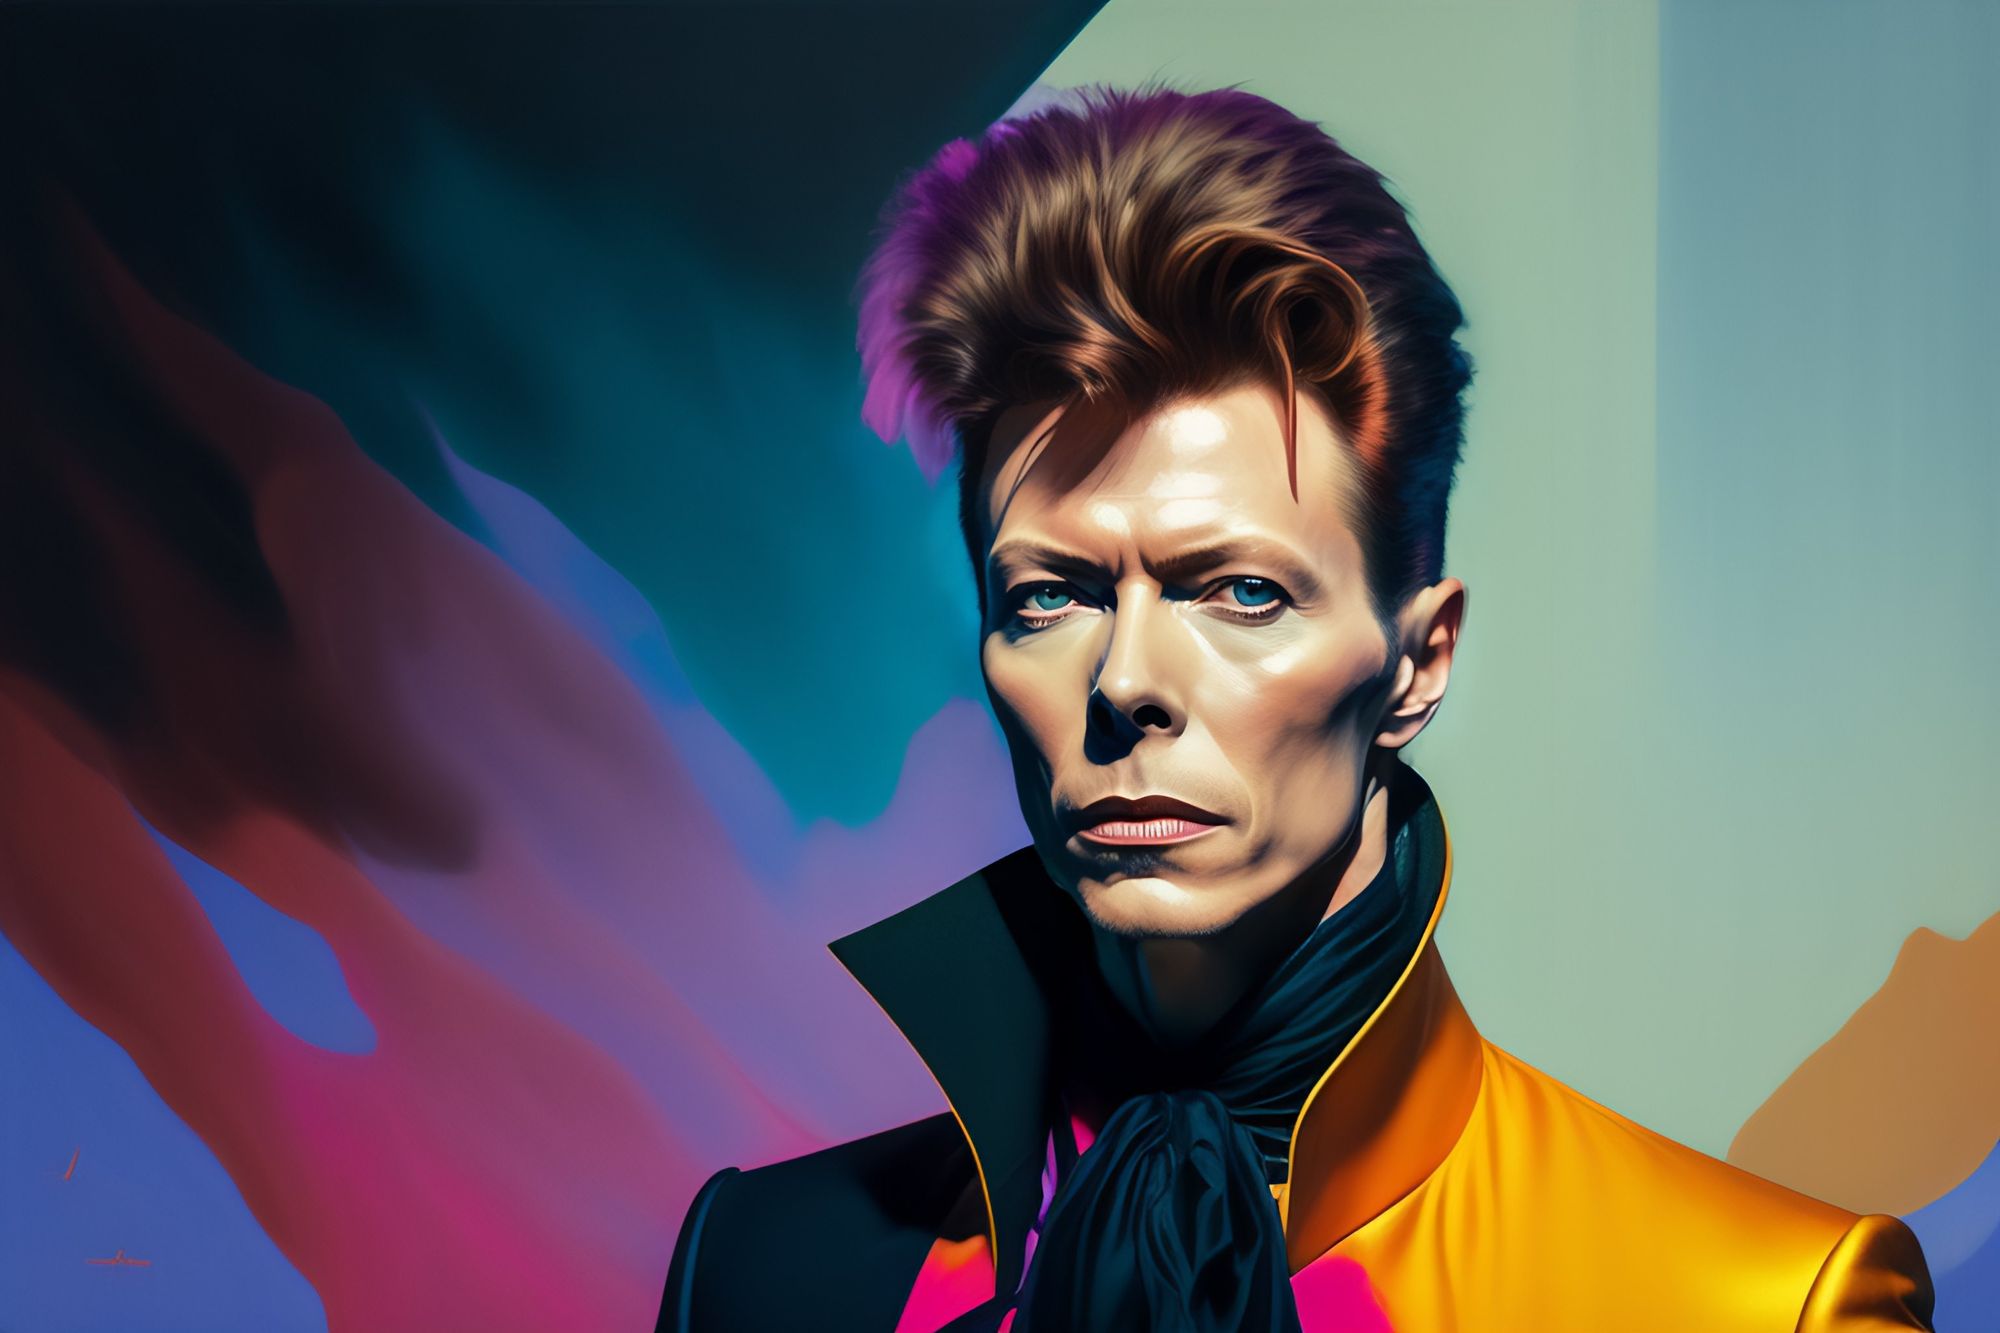 David Bowie's Unreleased "Let's Dance" Version Comes to Life Through Revolutionary NFT Collaboration